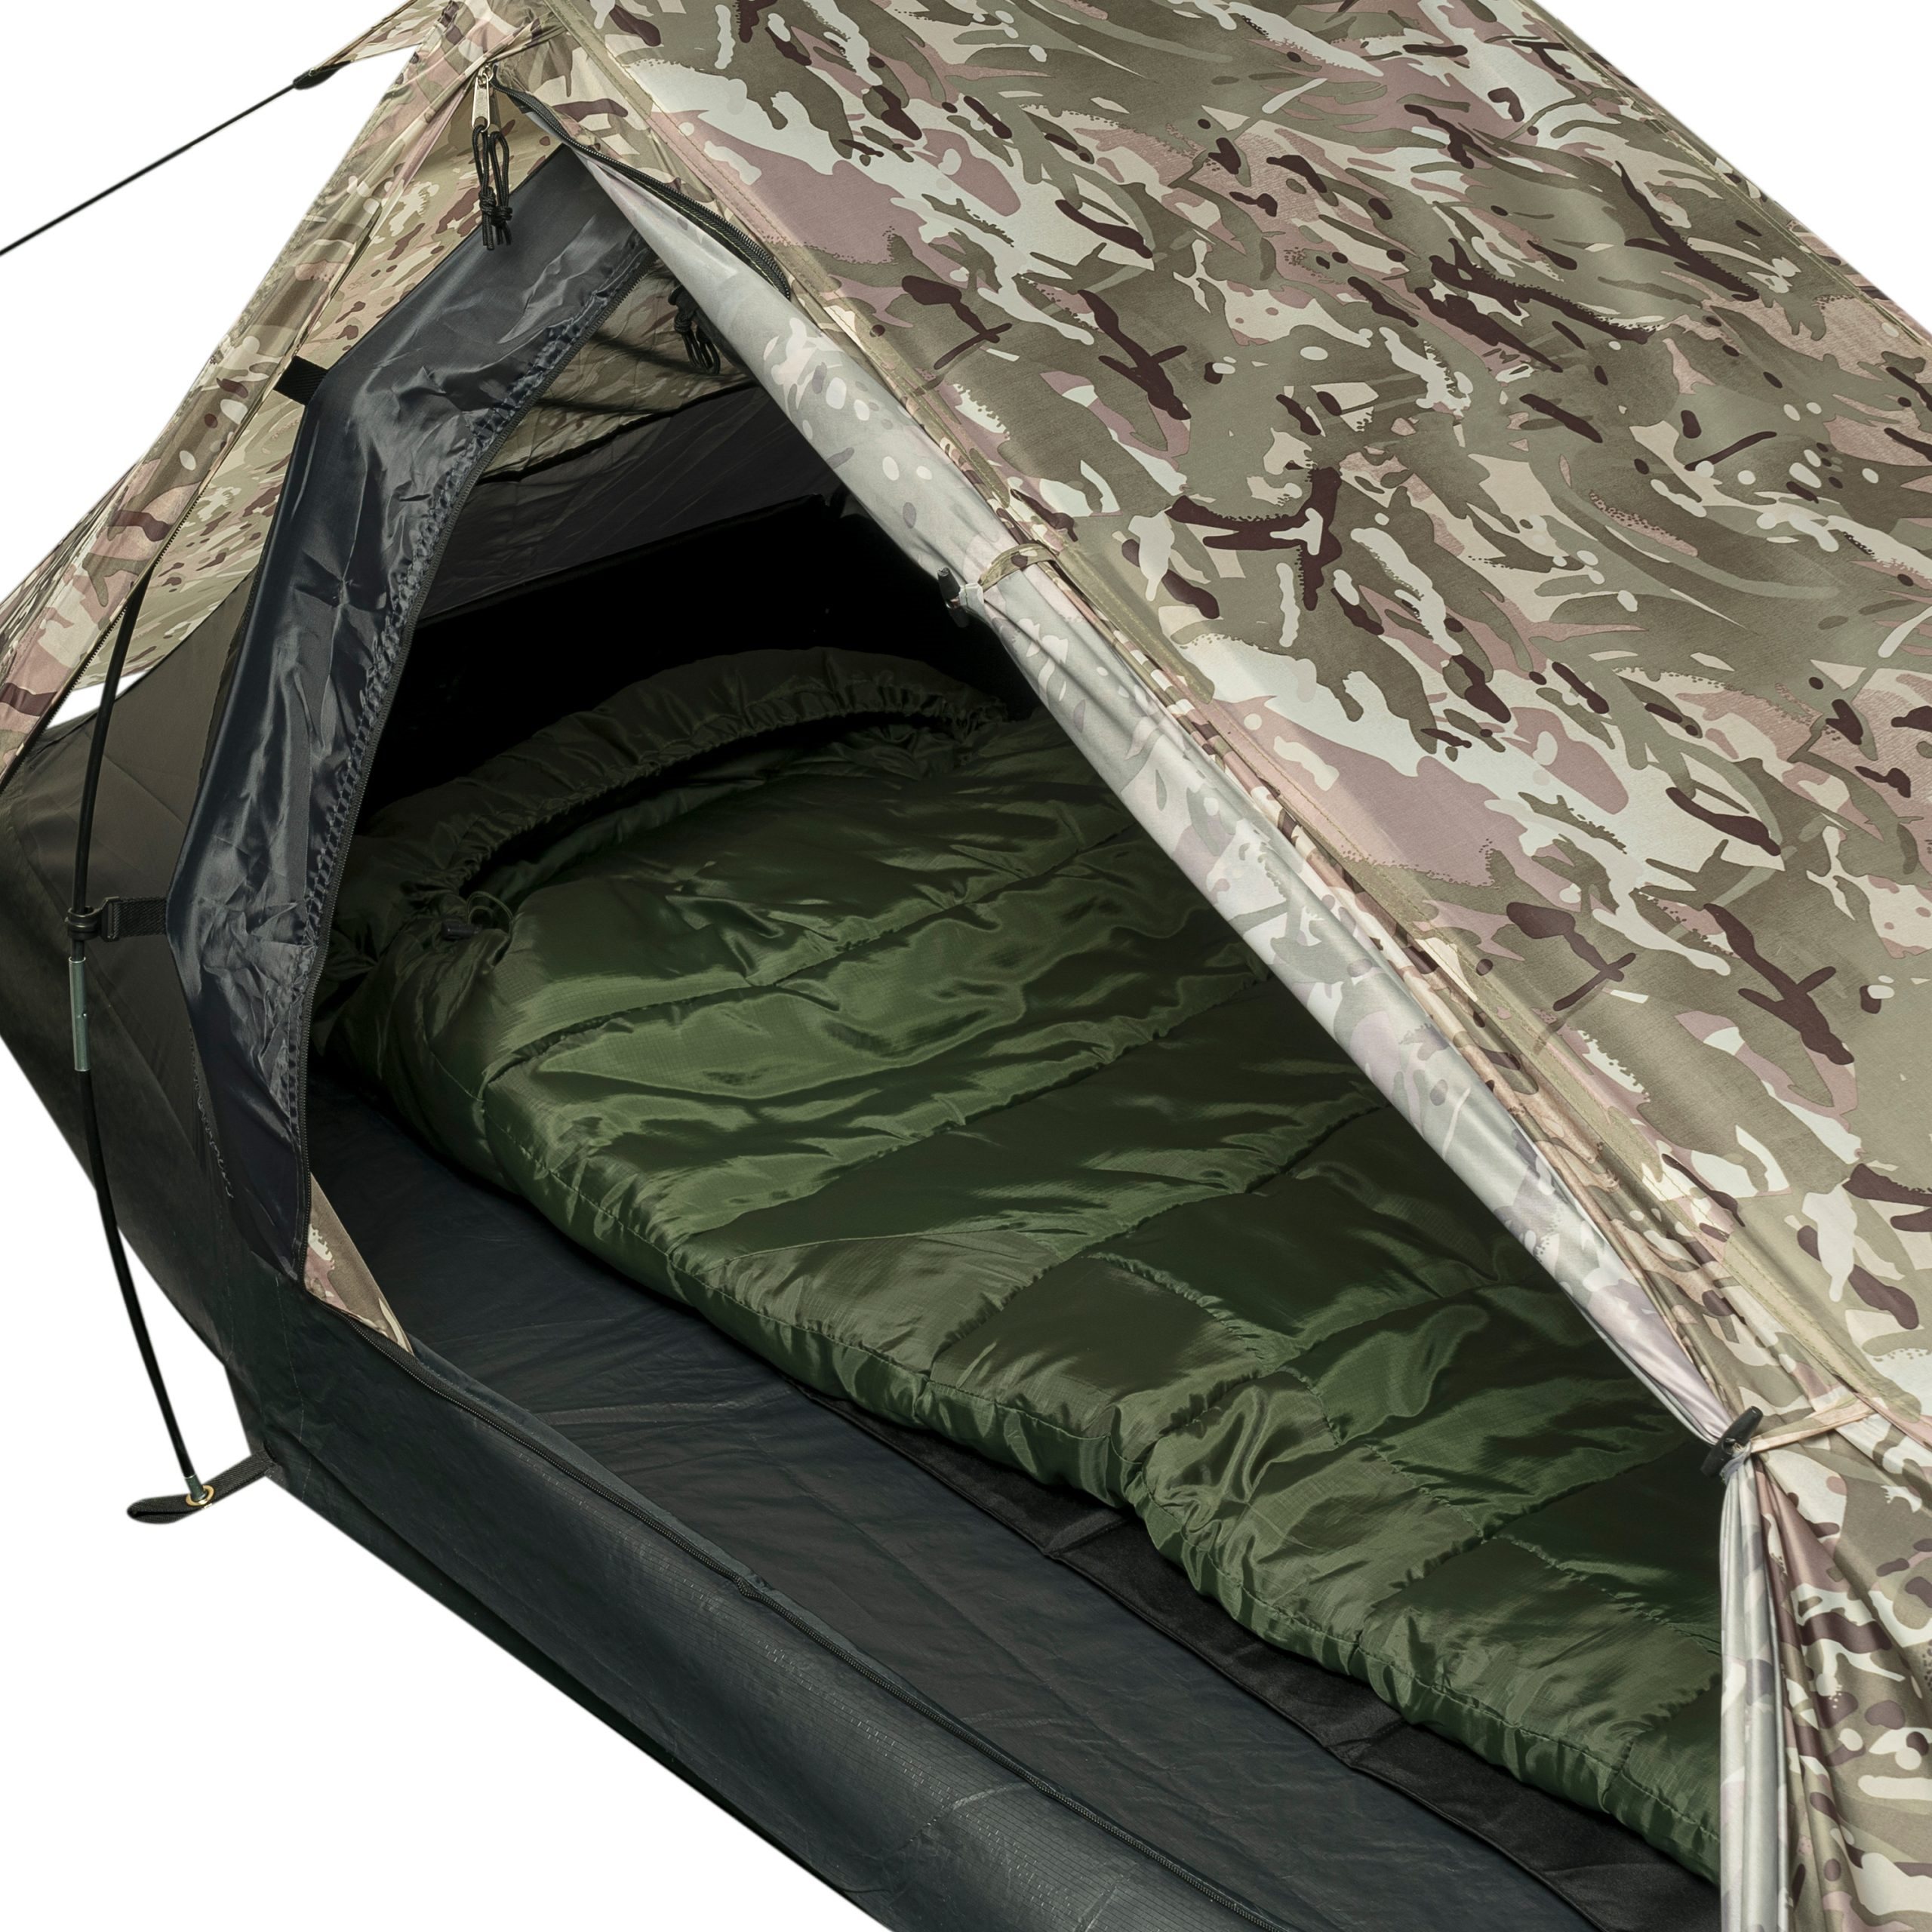 Highlander Blackthorn 2 Man Military Army Camping Backpacking Tent HMTC Camo 